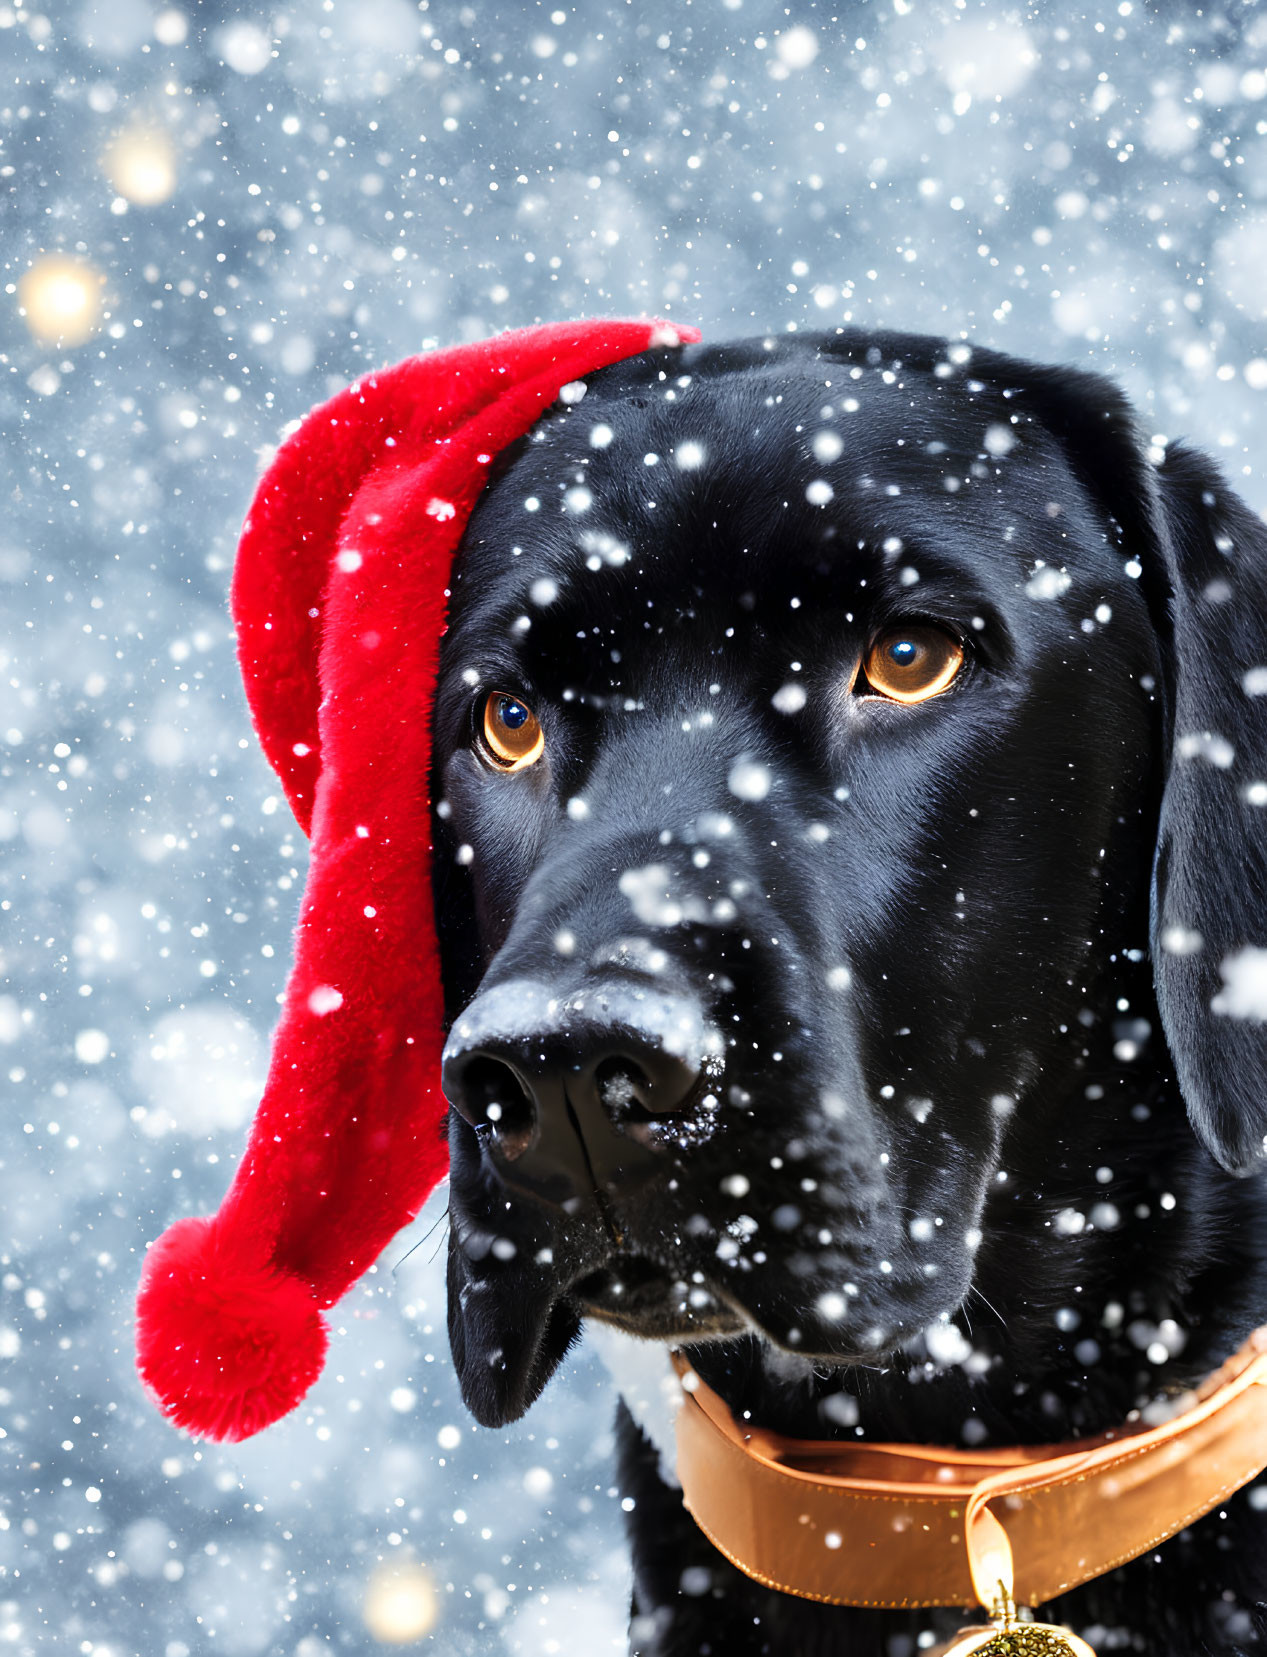 Black Dog in Santa Hat with Falling Snowflakes